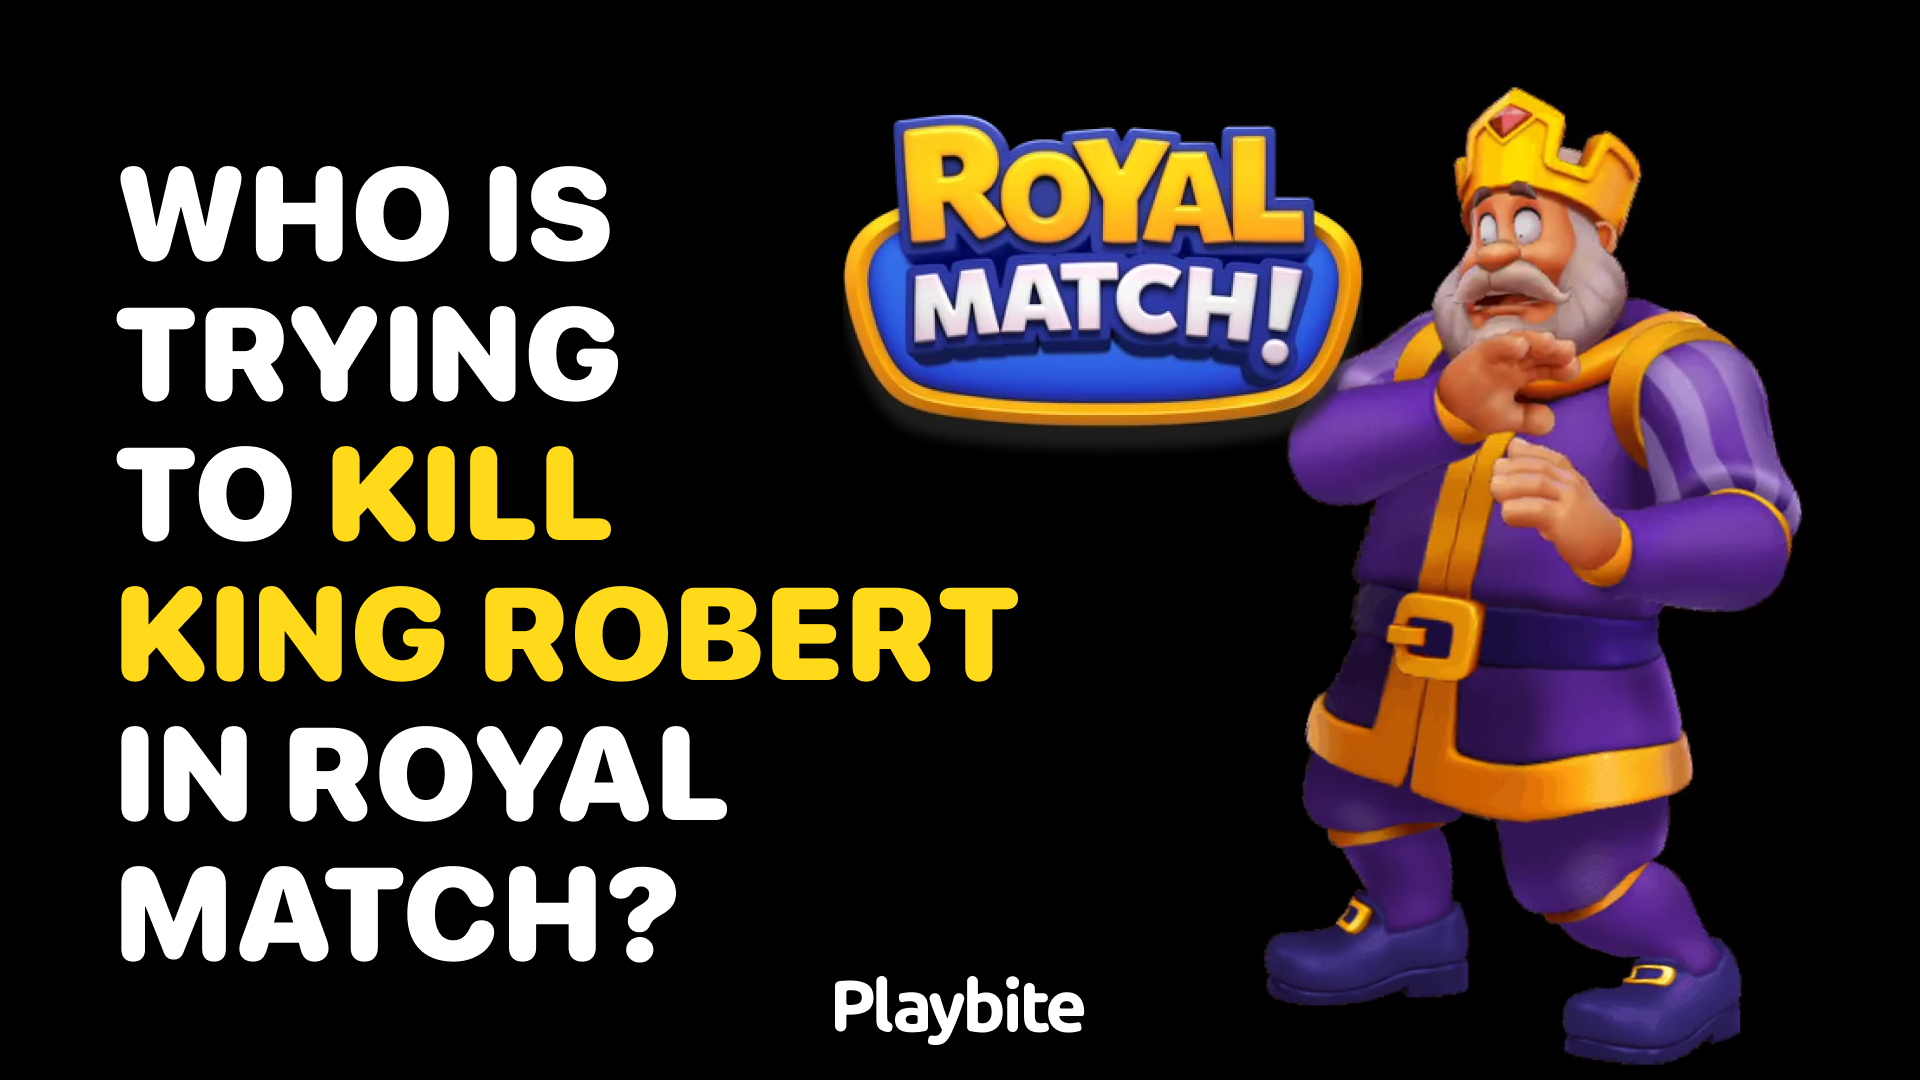 Who Is Trying to Kill King Robert in Royal Match?